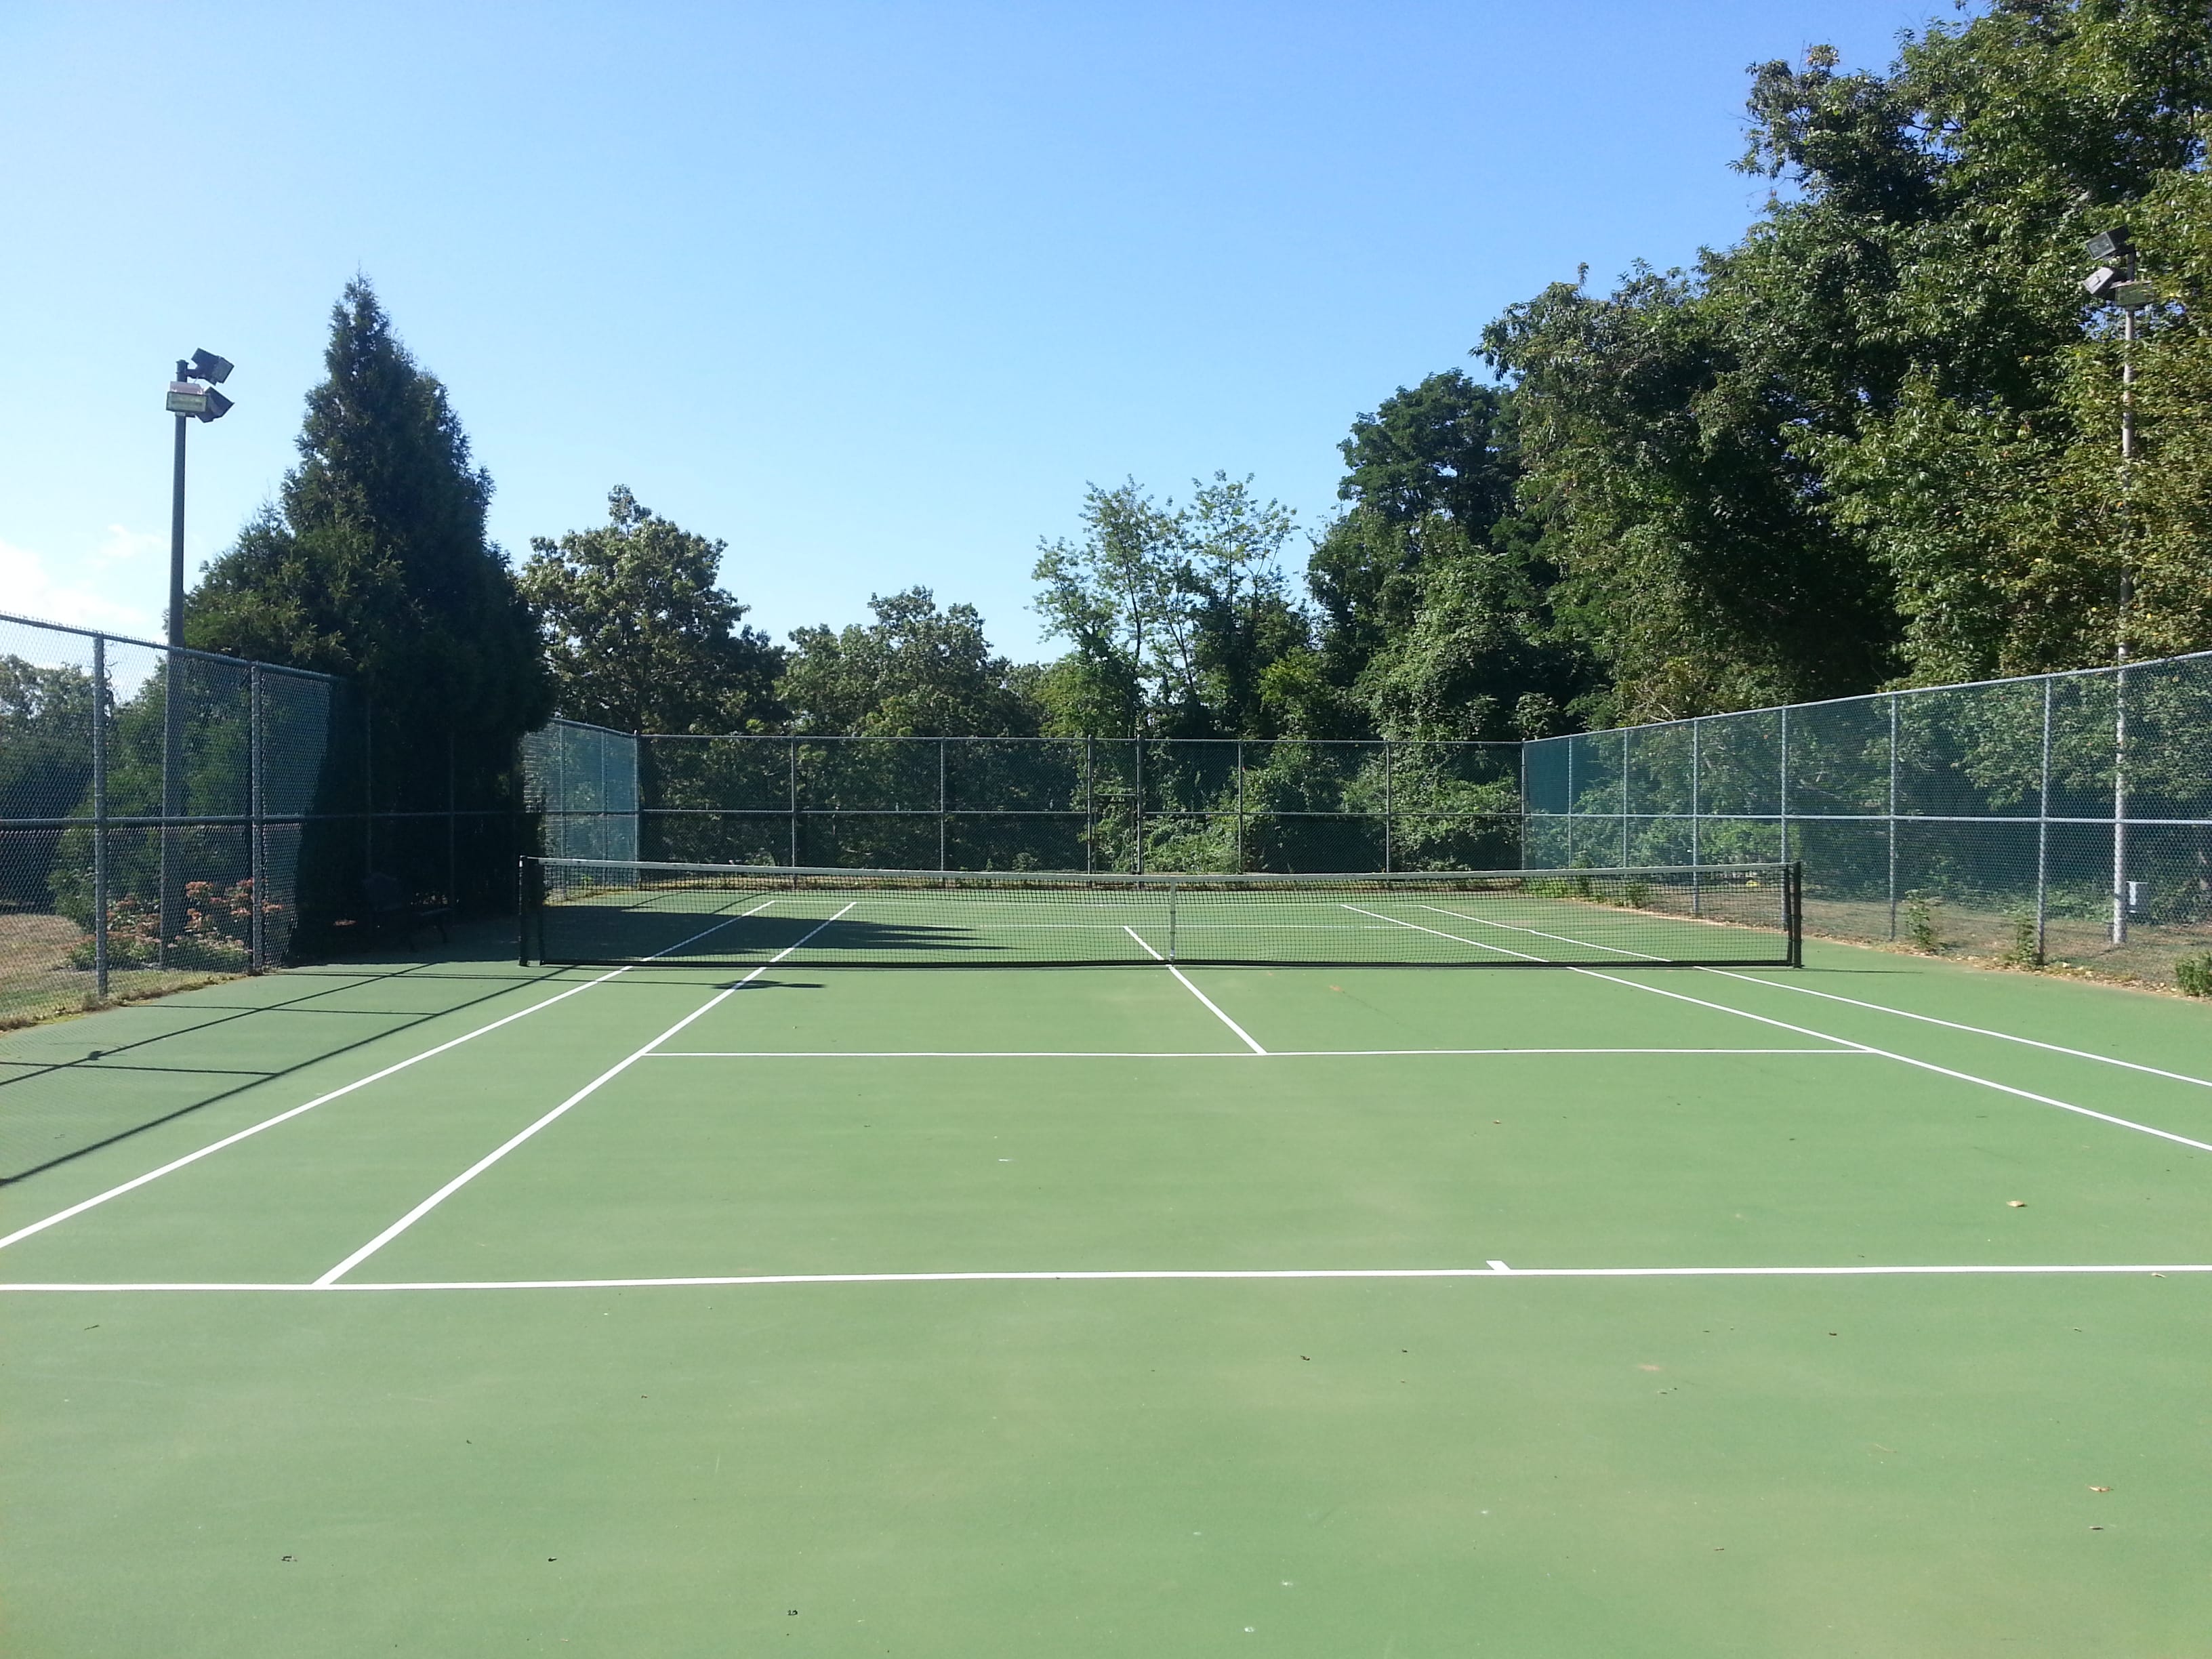 Among the amenities at Easpointe is this tennis court located next to the pool.